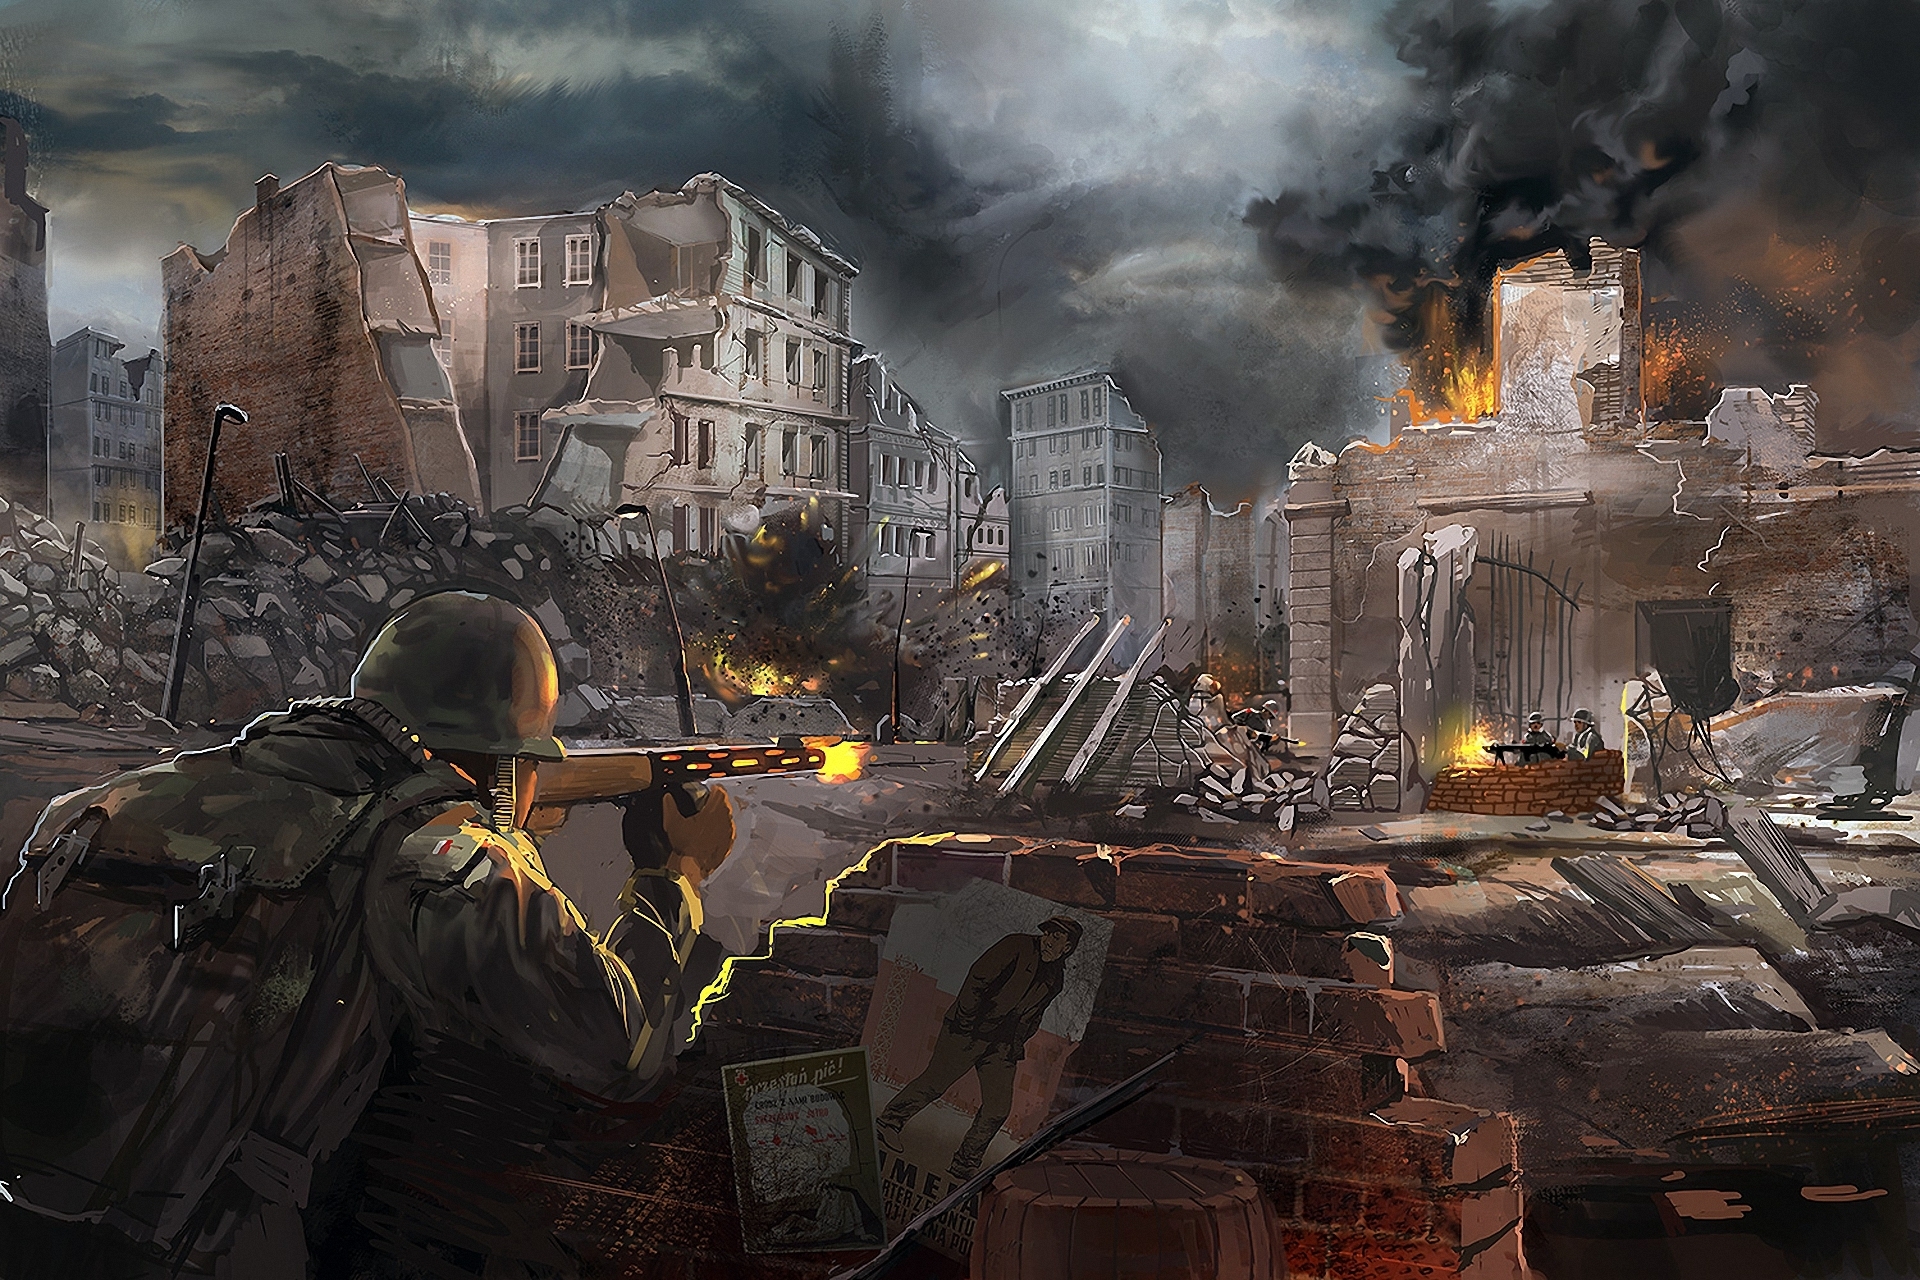 call of duty, Military, Soldiers, People, Weapons, Guns, Rifles, Fire, Flames, Destruction, Cities, Games, Video games, Entertainment Wallpaper